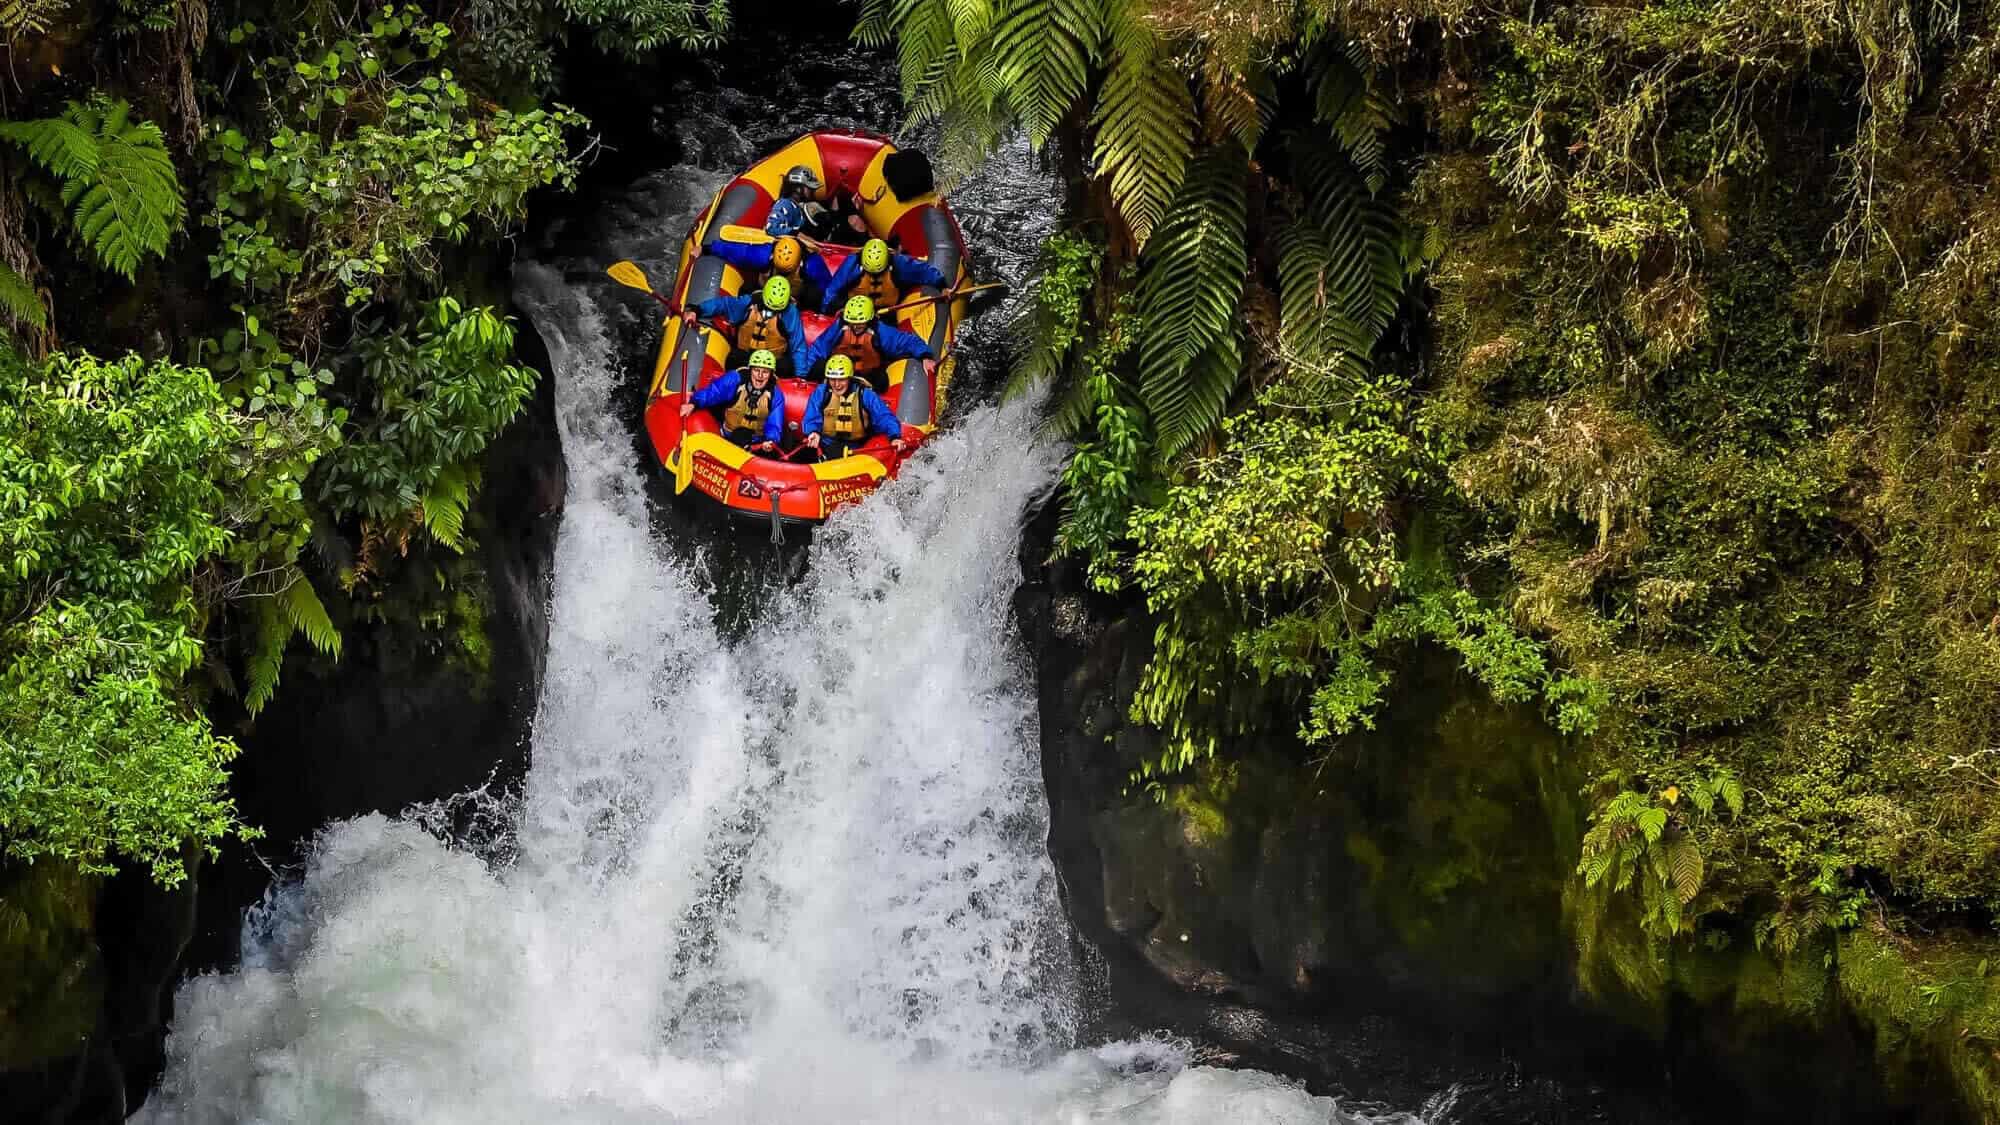 An inflatable raft filled with people dropping down a steep waterfall with green lush plants and rocks on either side.